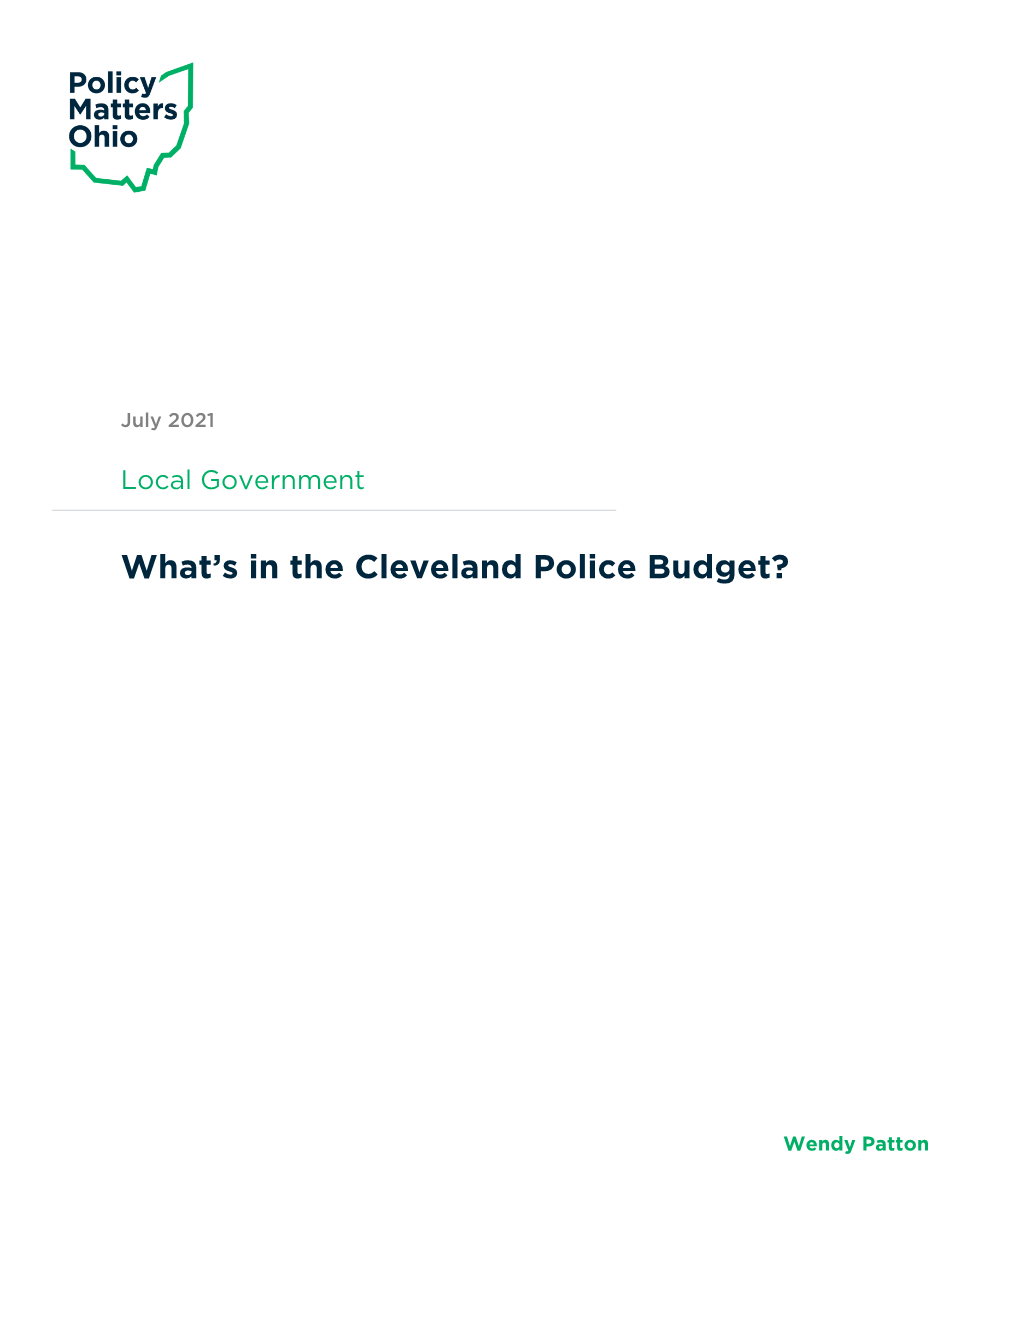 What's in the Cleveland Police Budget?